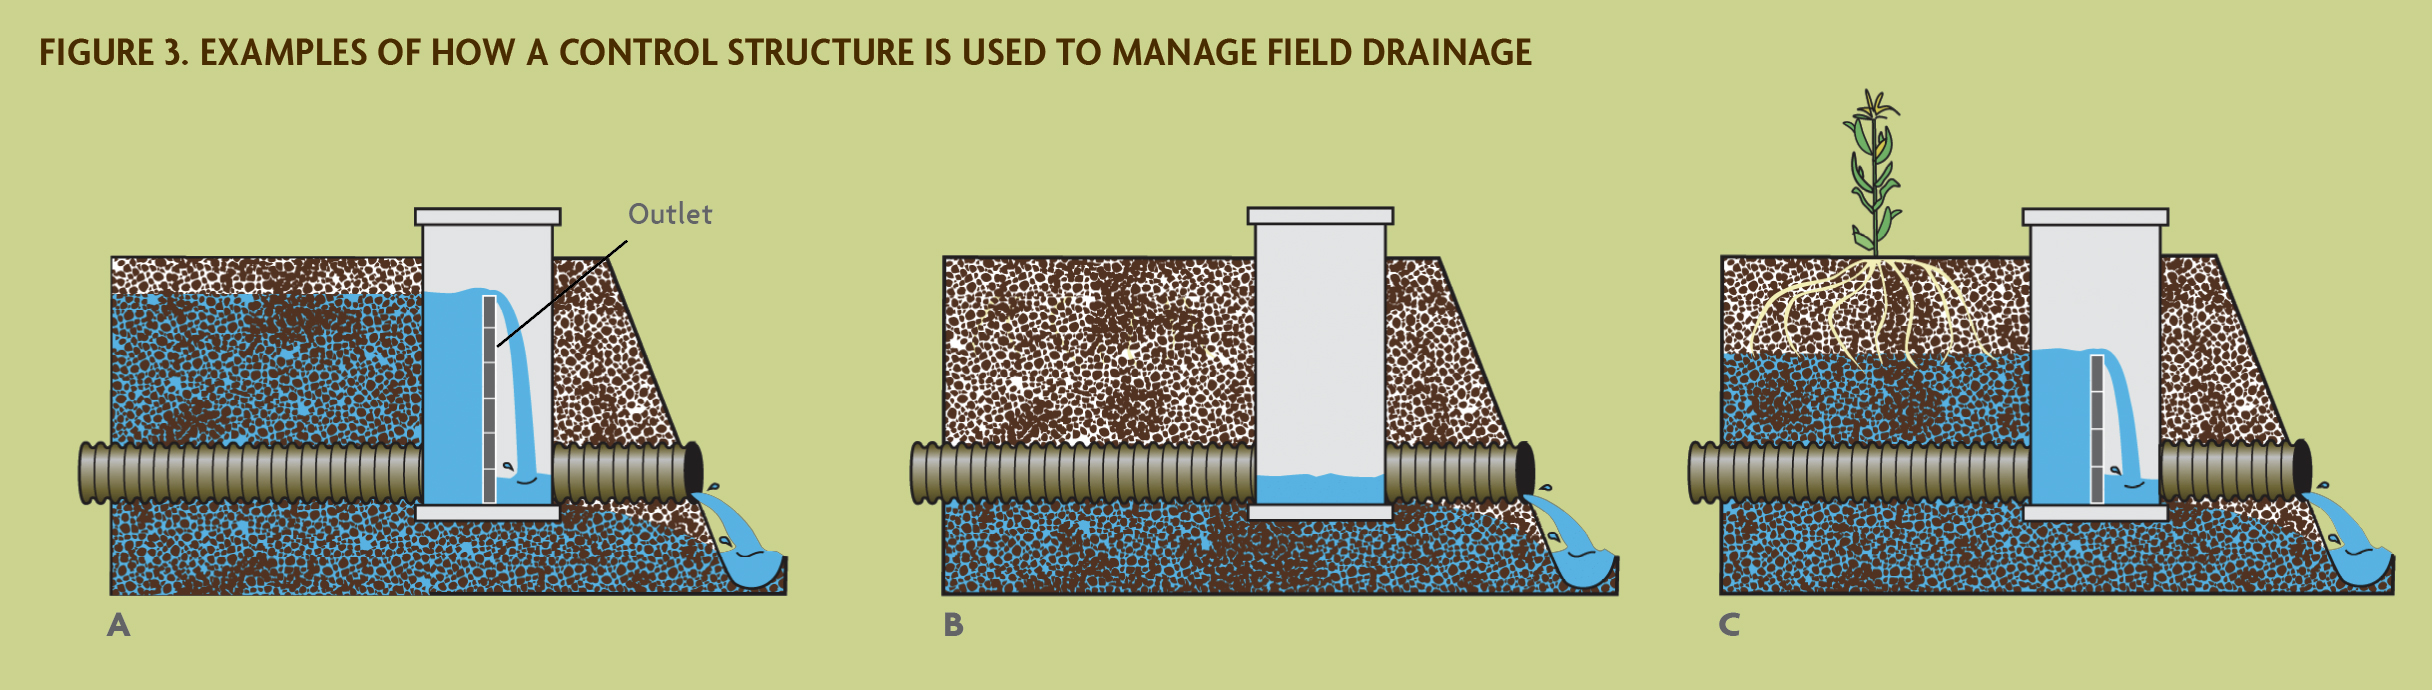 https://www.sare.org/wp-content/uploads/Figure-3-How-Control-Strucutre-Manages-Filed-Drainage.jpg